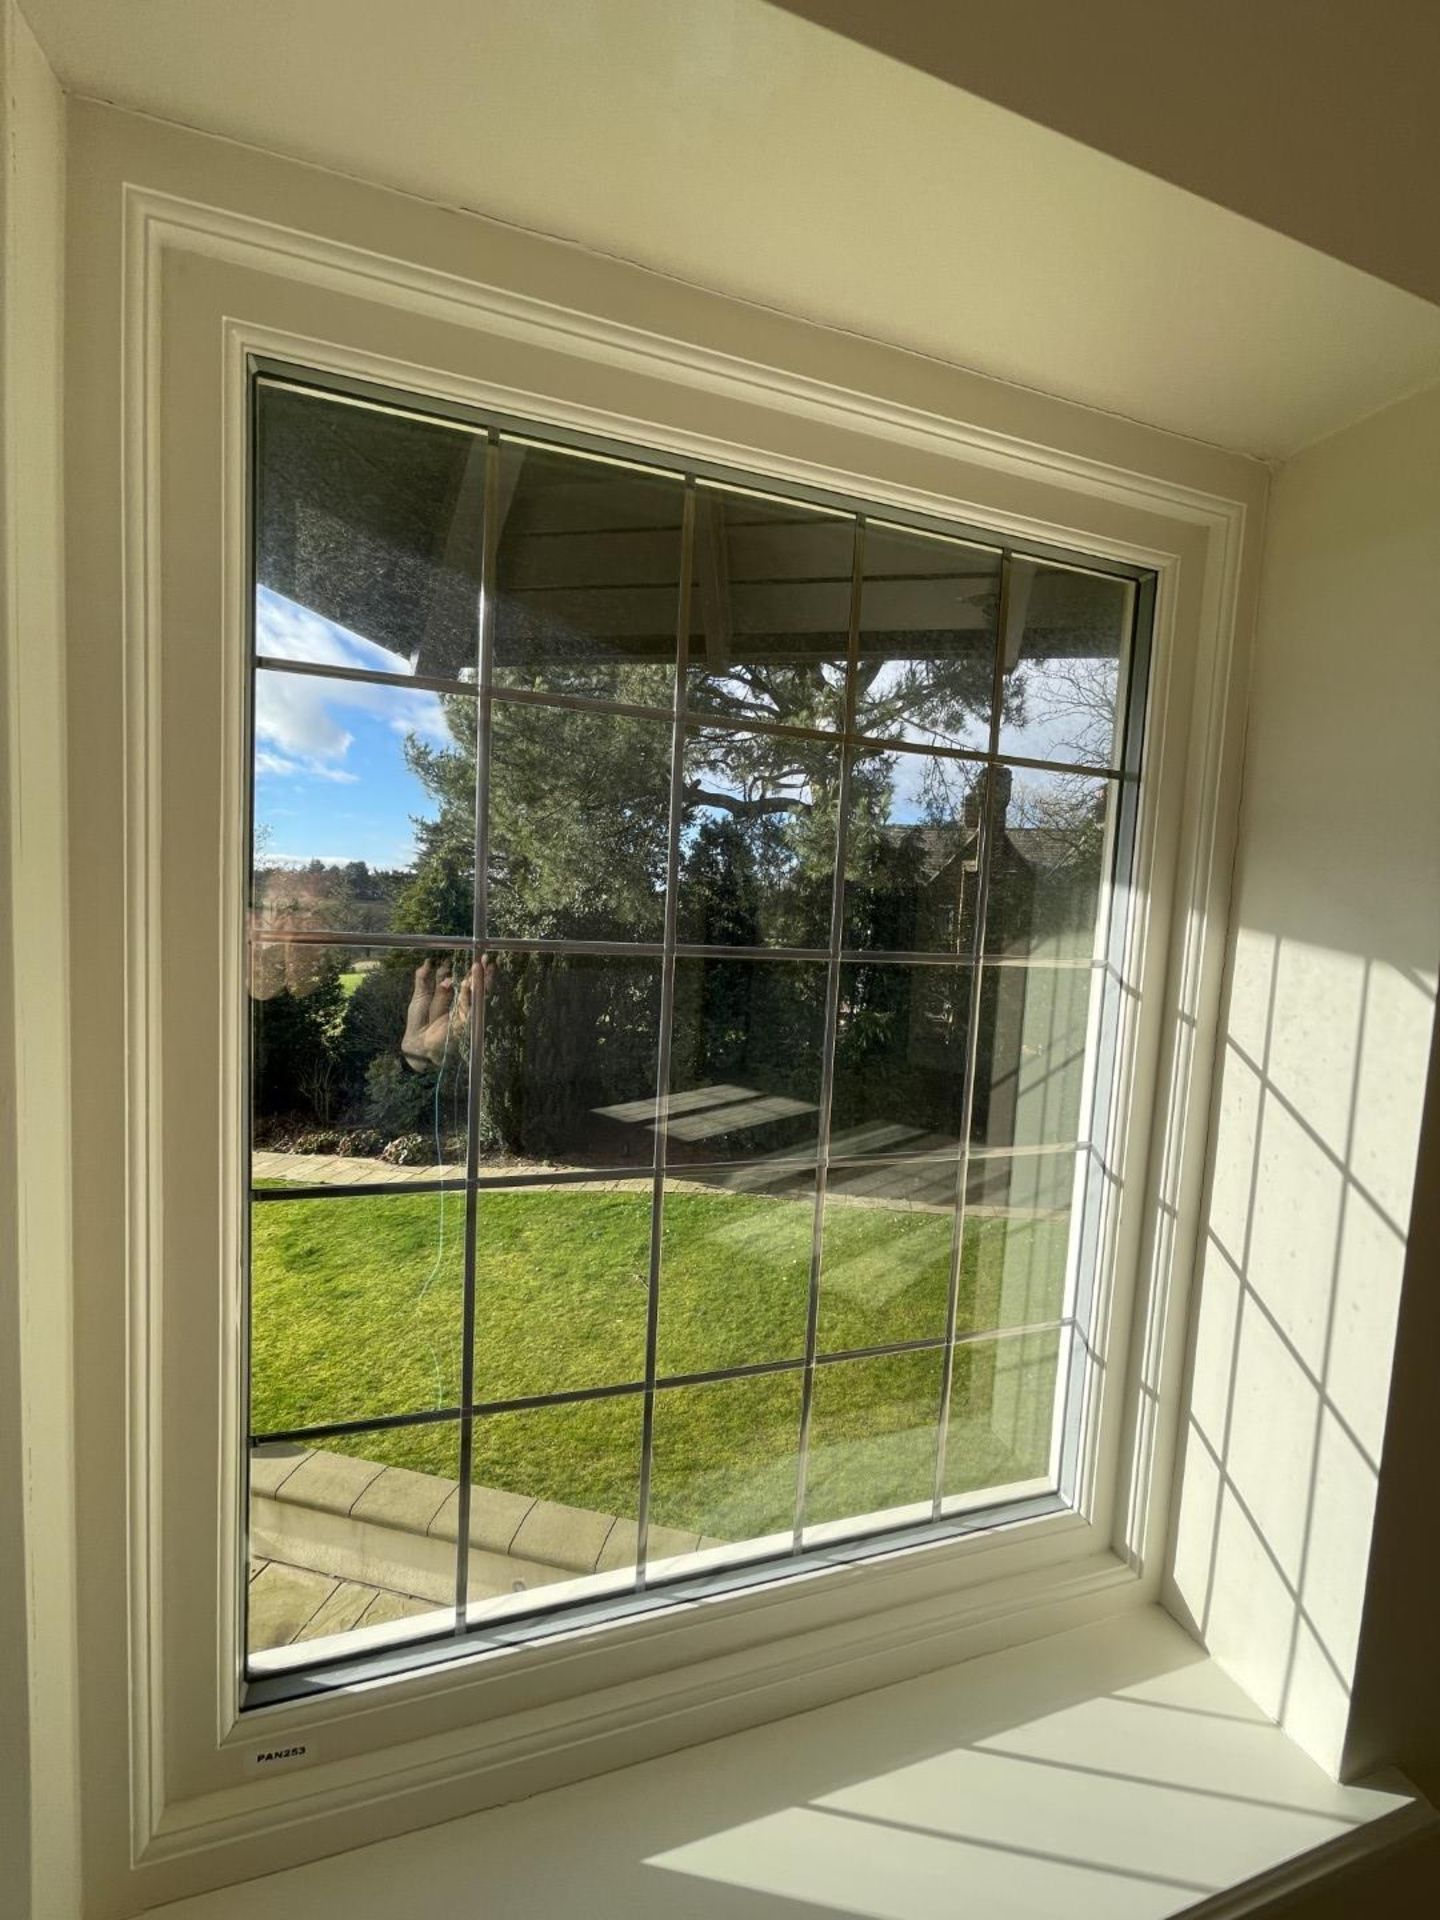 1 x Hardwood Timber Double Glazed Leaded Window Frame - Ref: PAN253 / BED 2- CL896 BED2 R/H- NO - Image 4 of 8